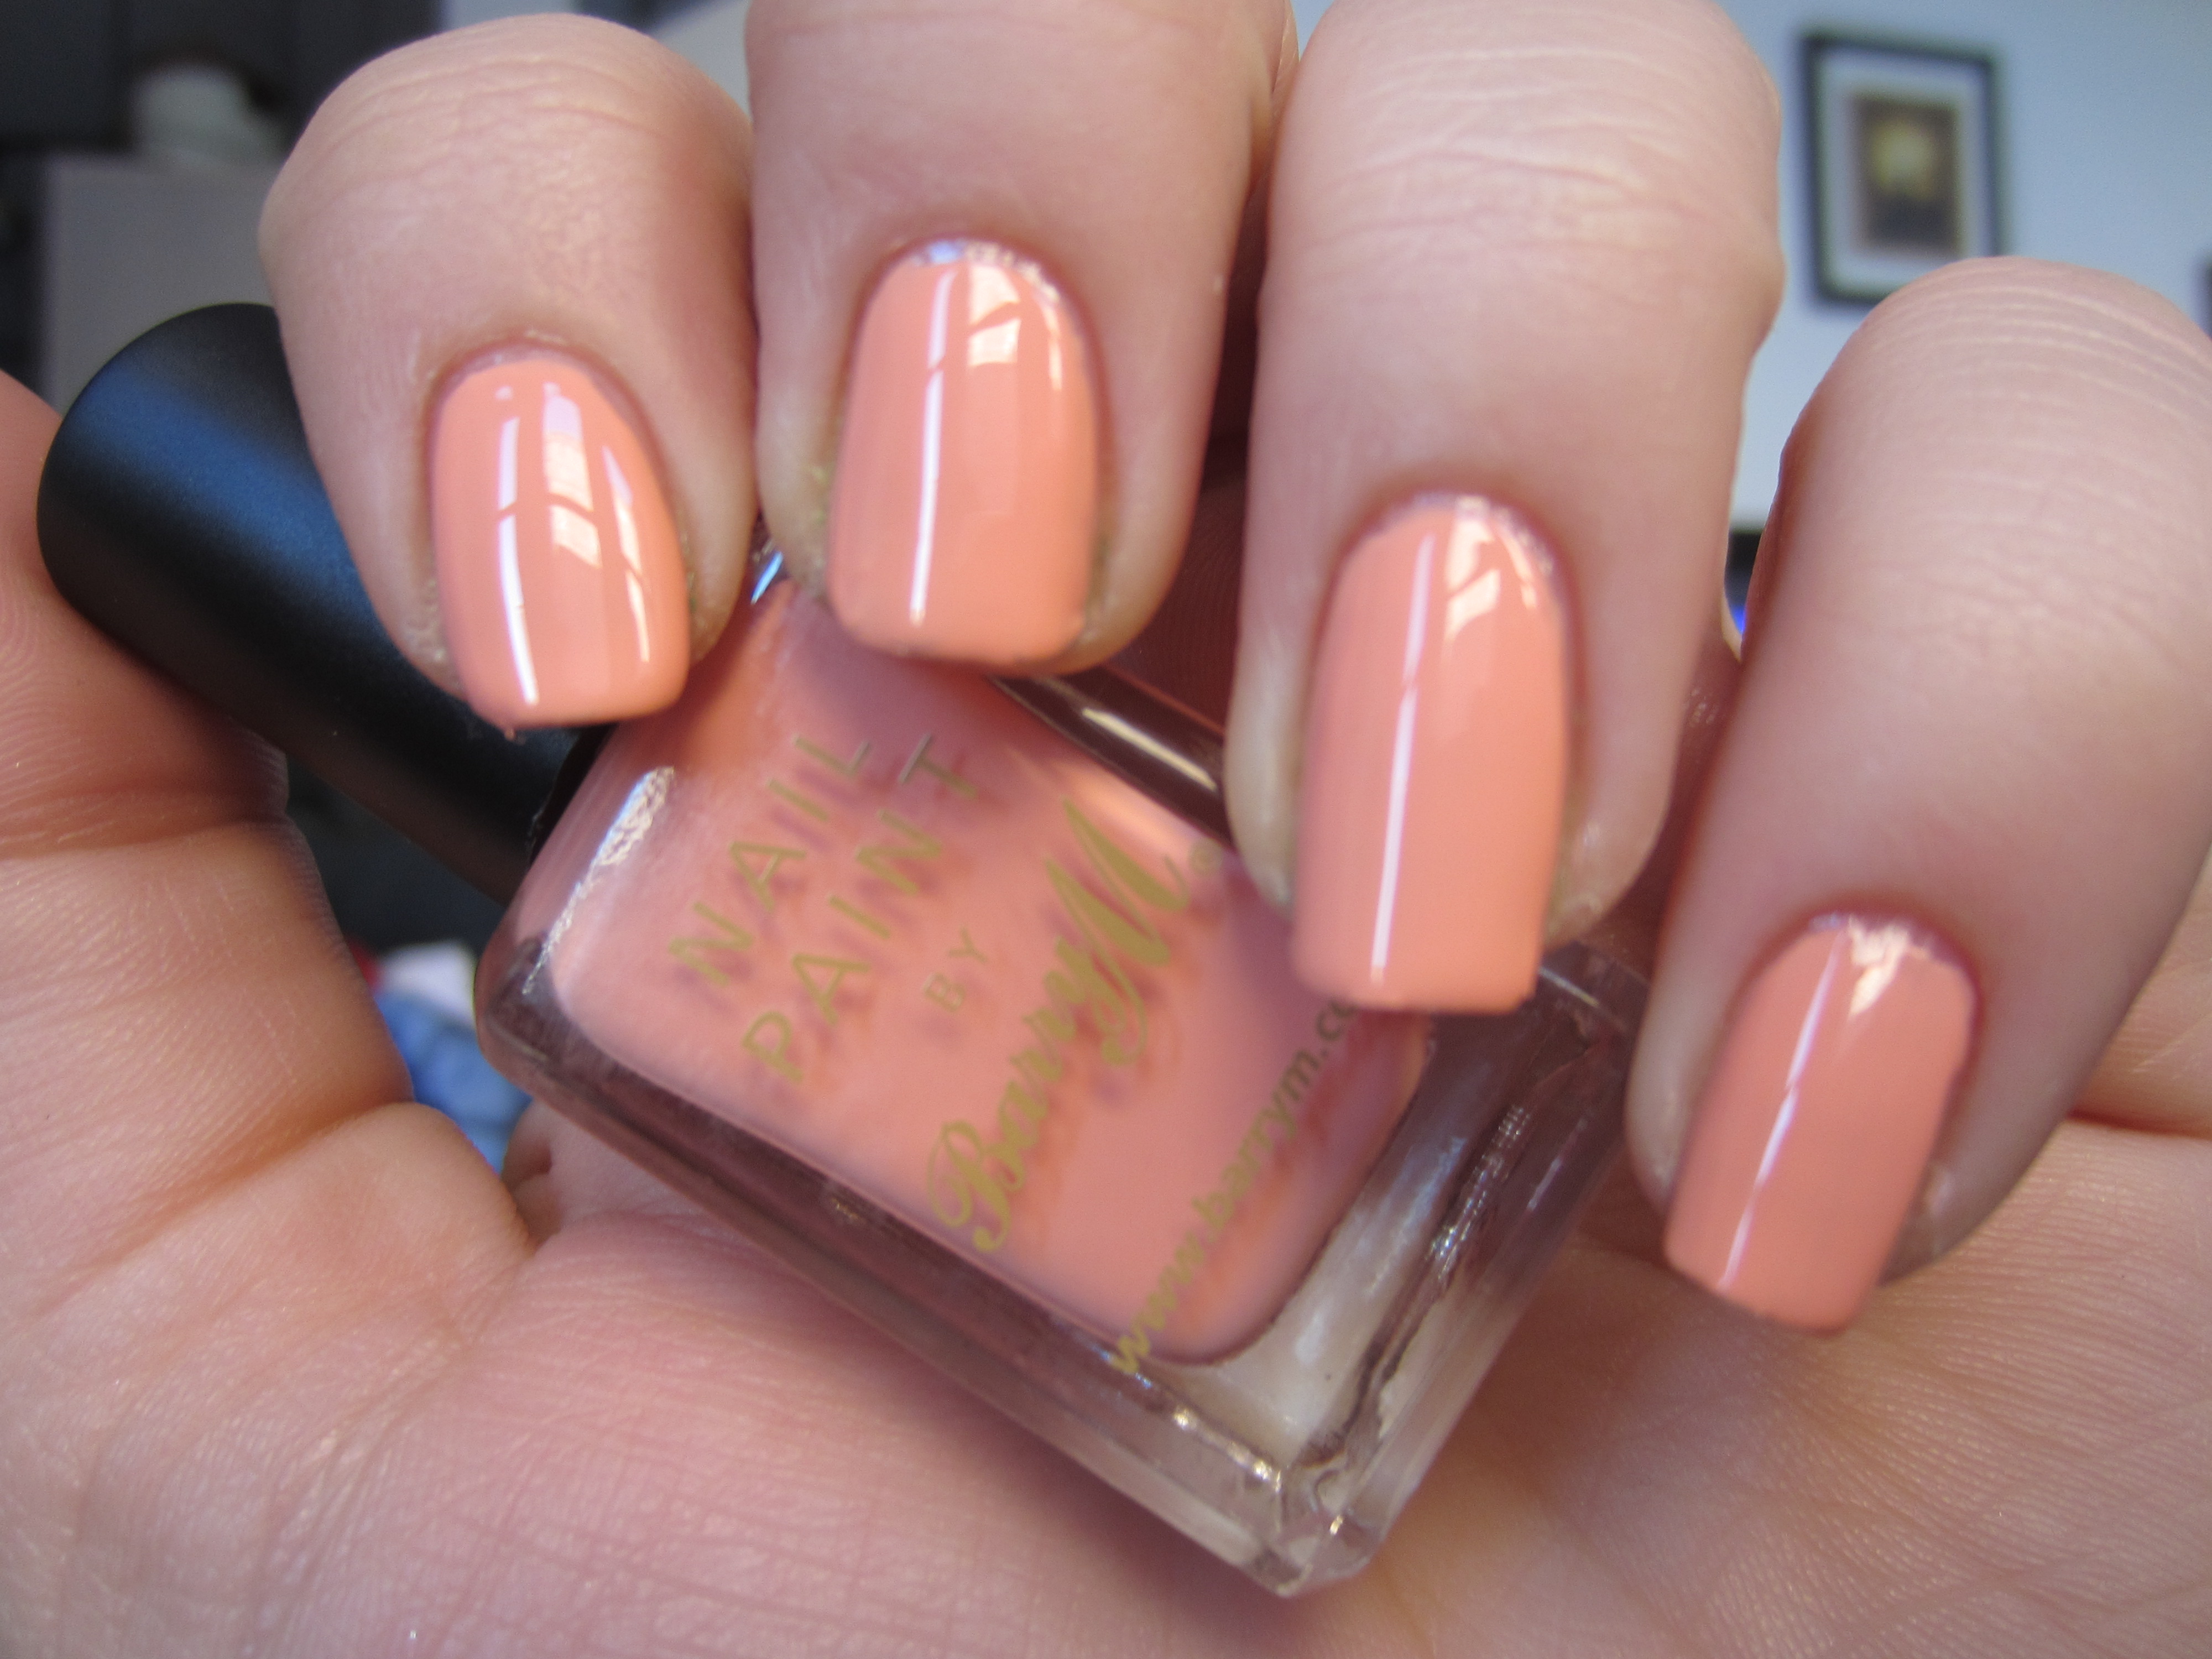 6. Peach and Floral Nail Art - wide 4